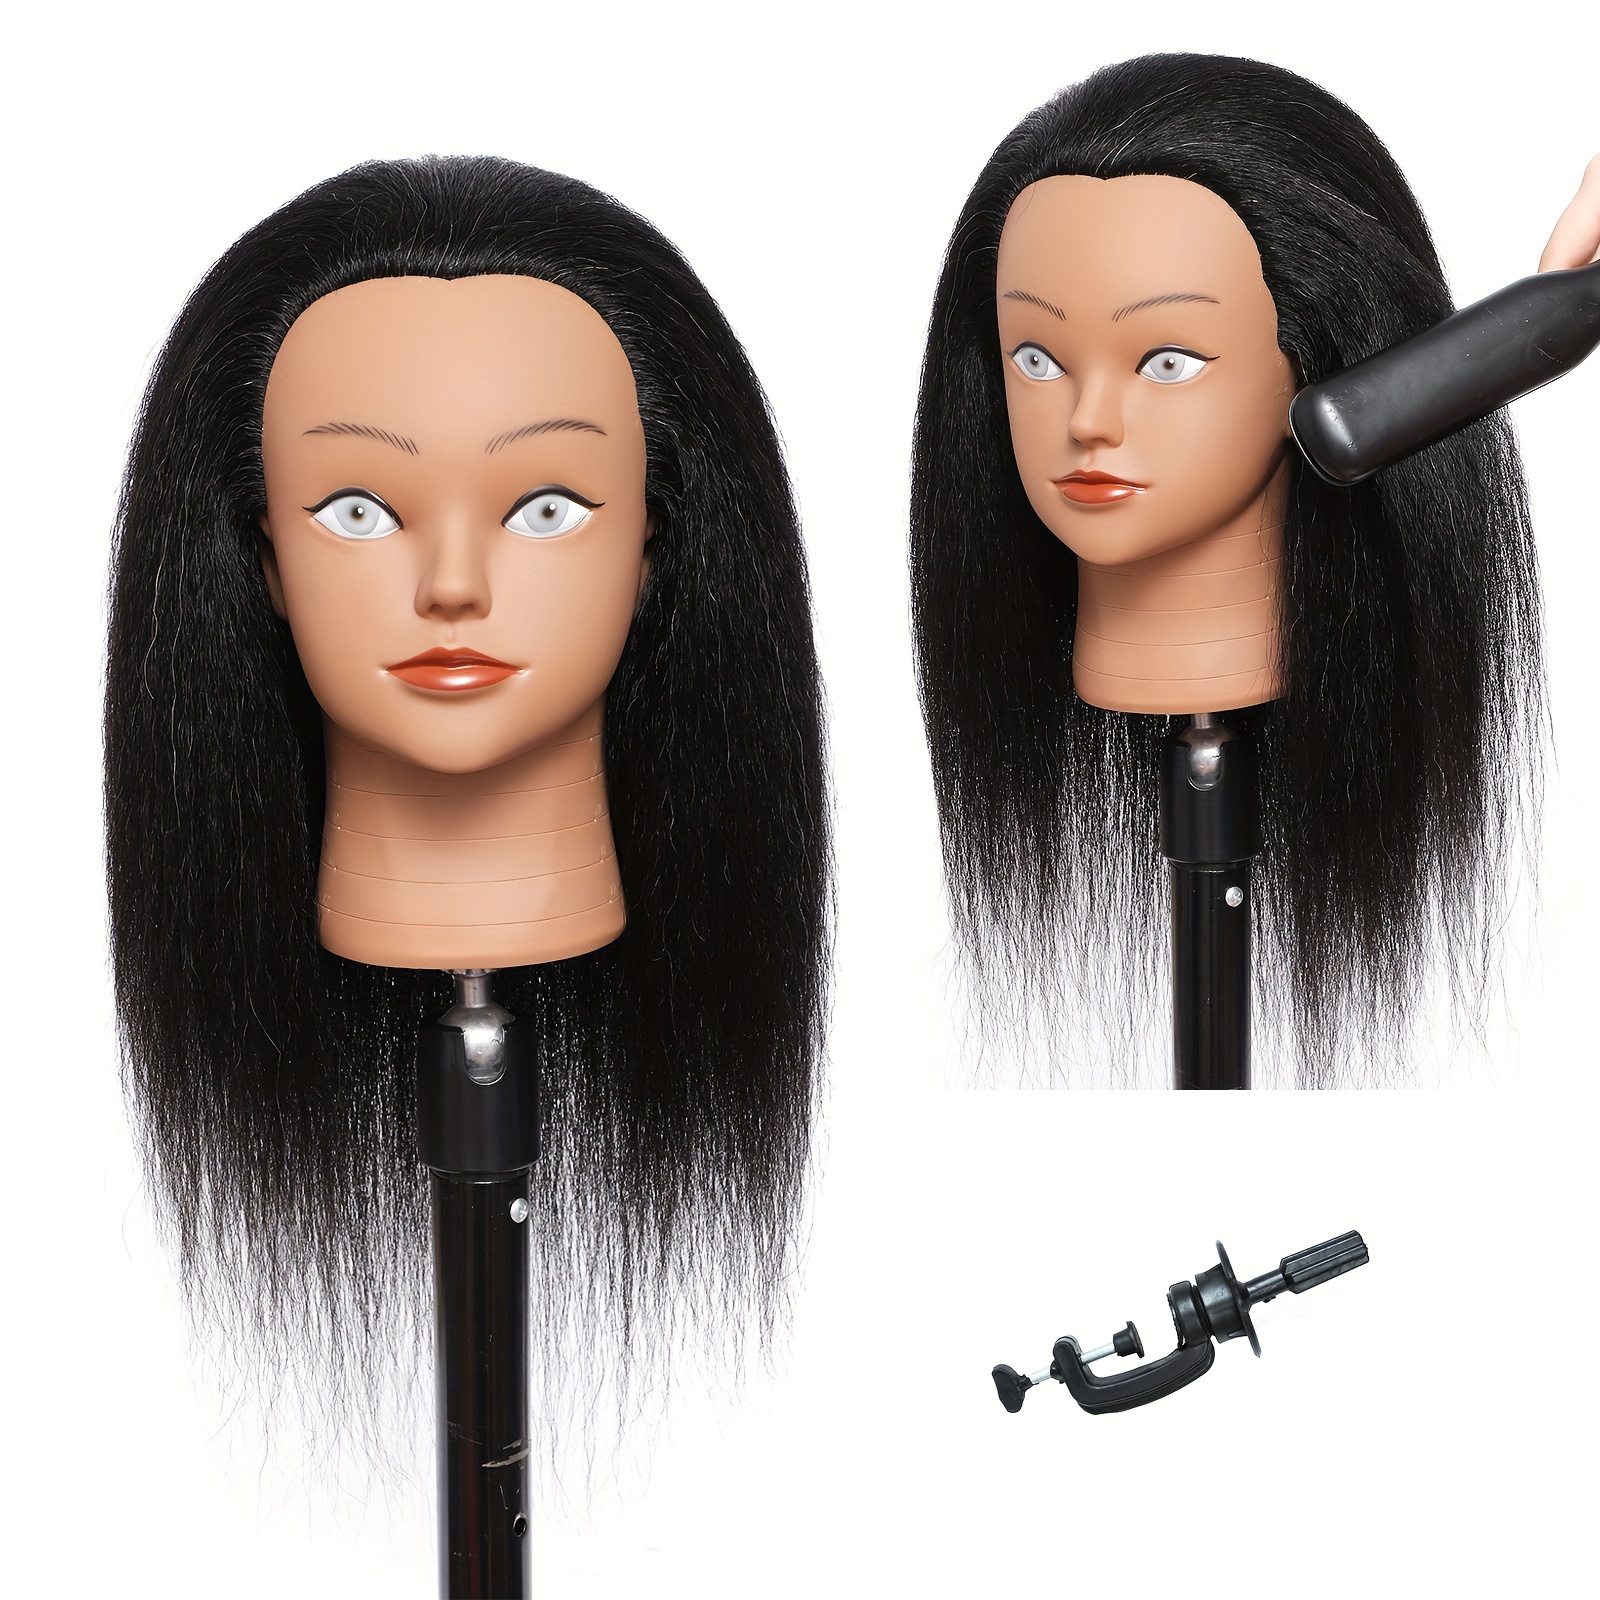 Mannequin Head With 100% Human Hair Afro Curly Hair Training Head Manikin  Head Cosmetology Doll Head for Hairdresser Girls Practice Styling Braiding  with Clamp Stand